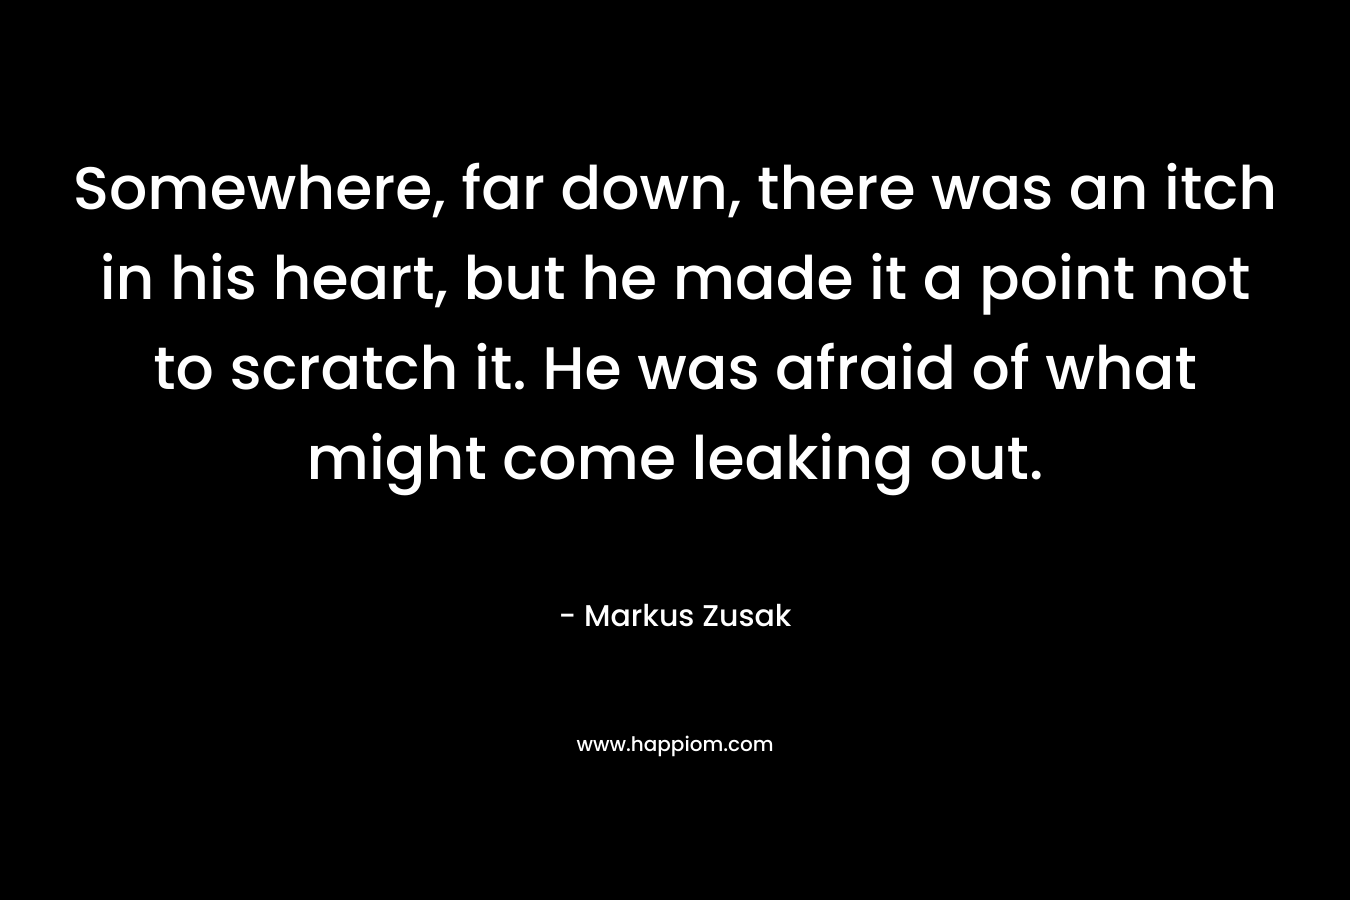 Somewhere, far down, there was an itch in his heart, but he made it a point not to scratch it. He was afraid of what might come leaking out. – Markus Zusak